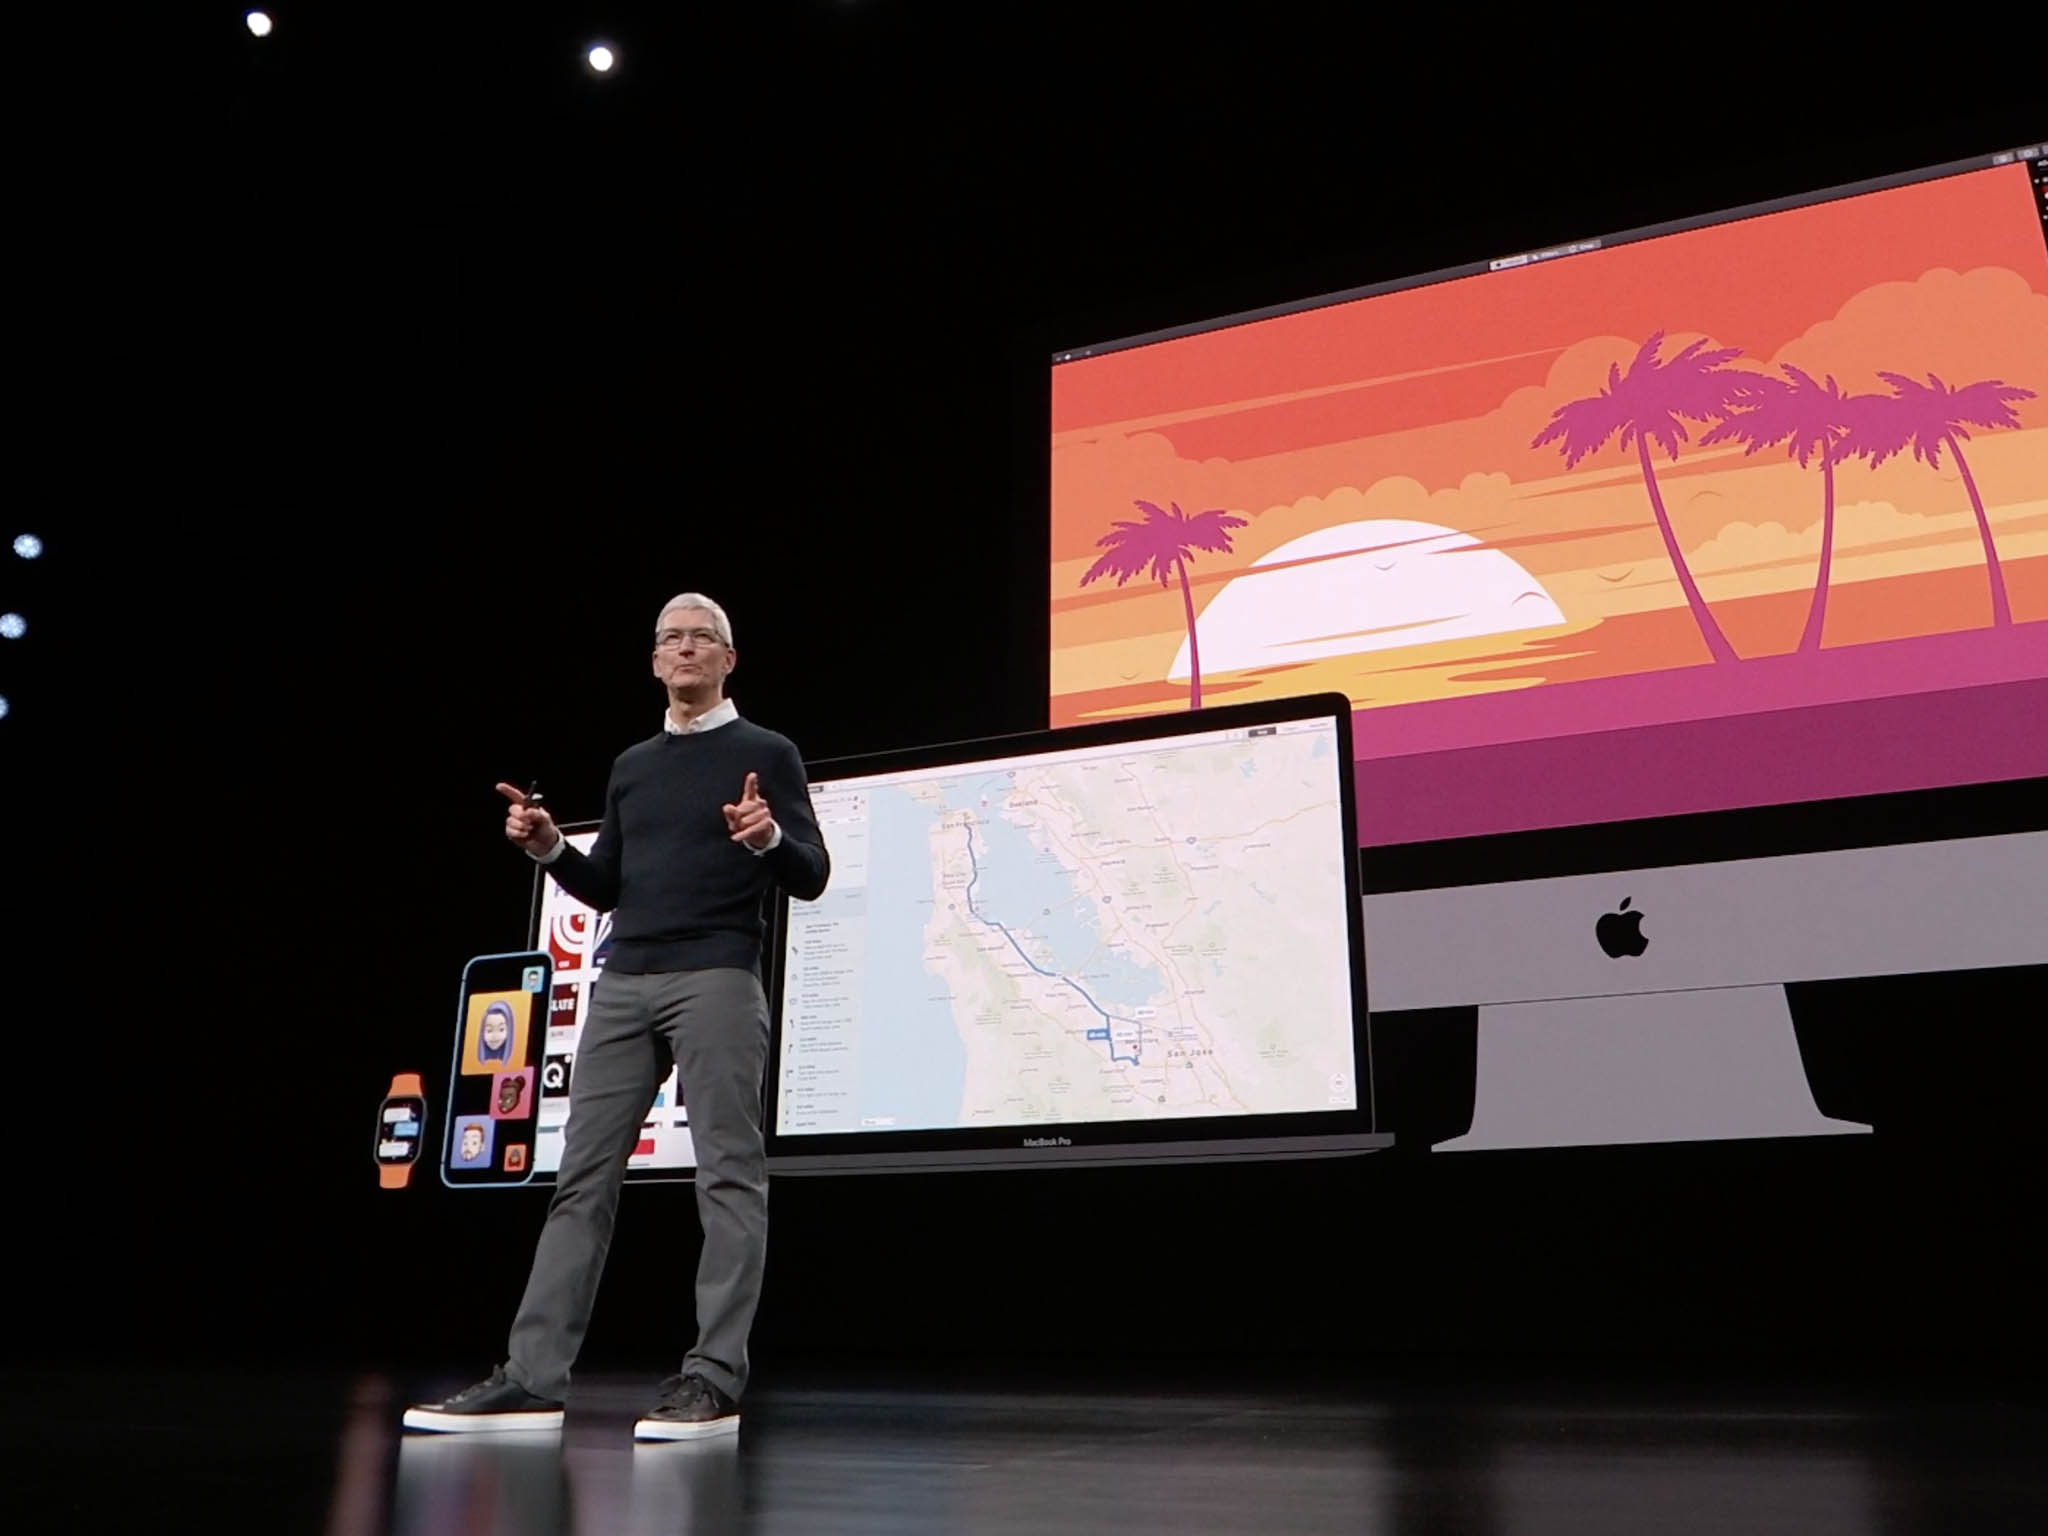 Tim Cook on stage at an Apple Event